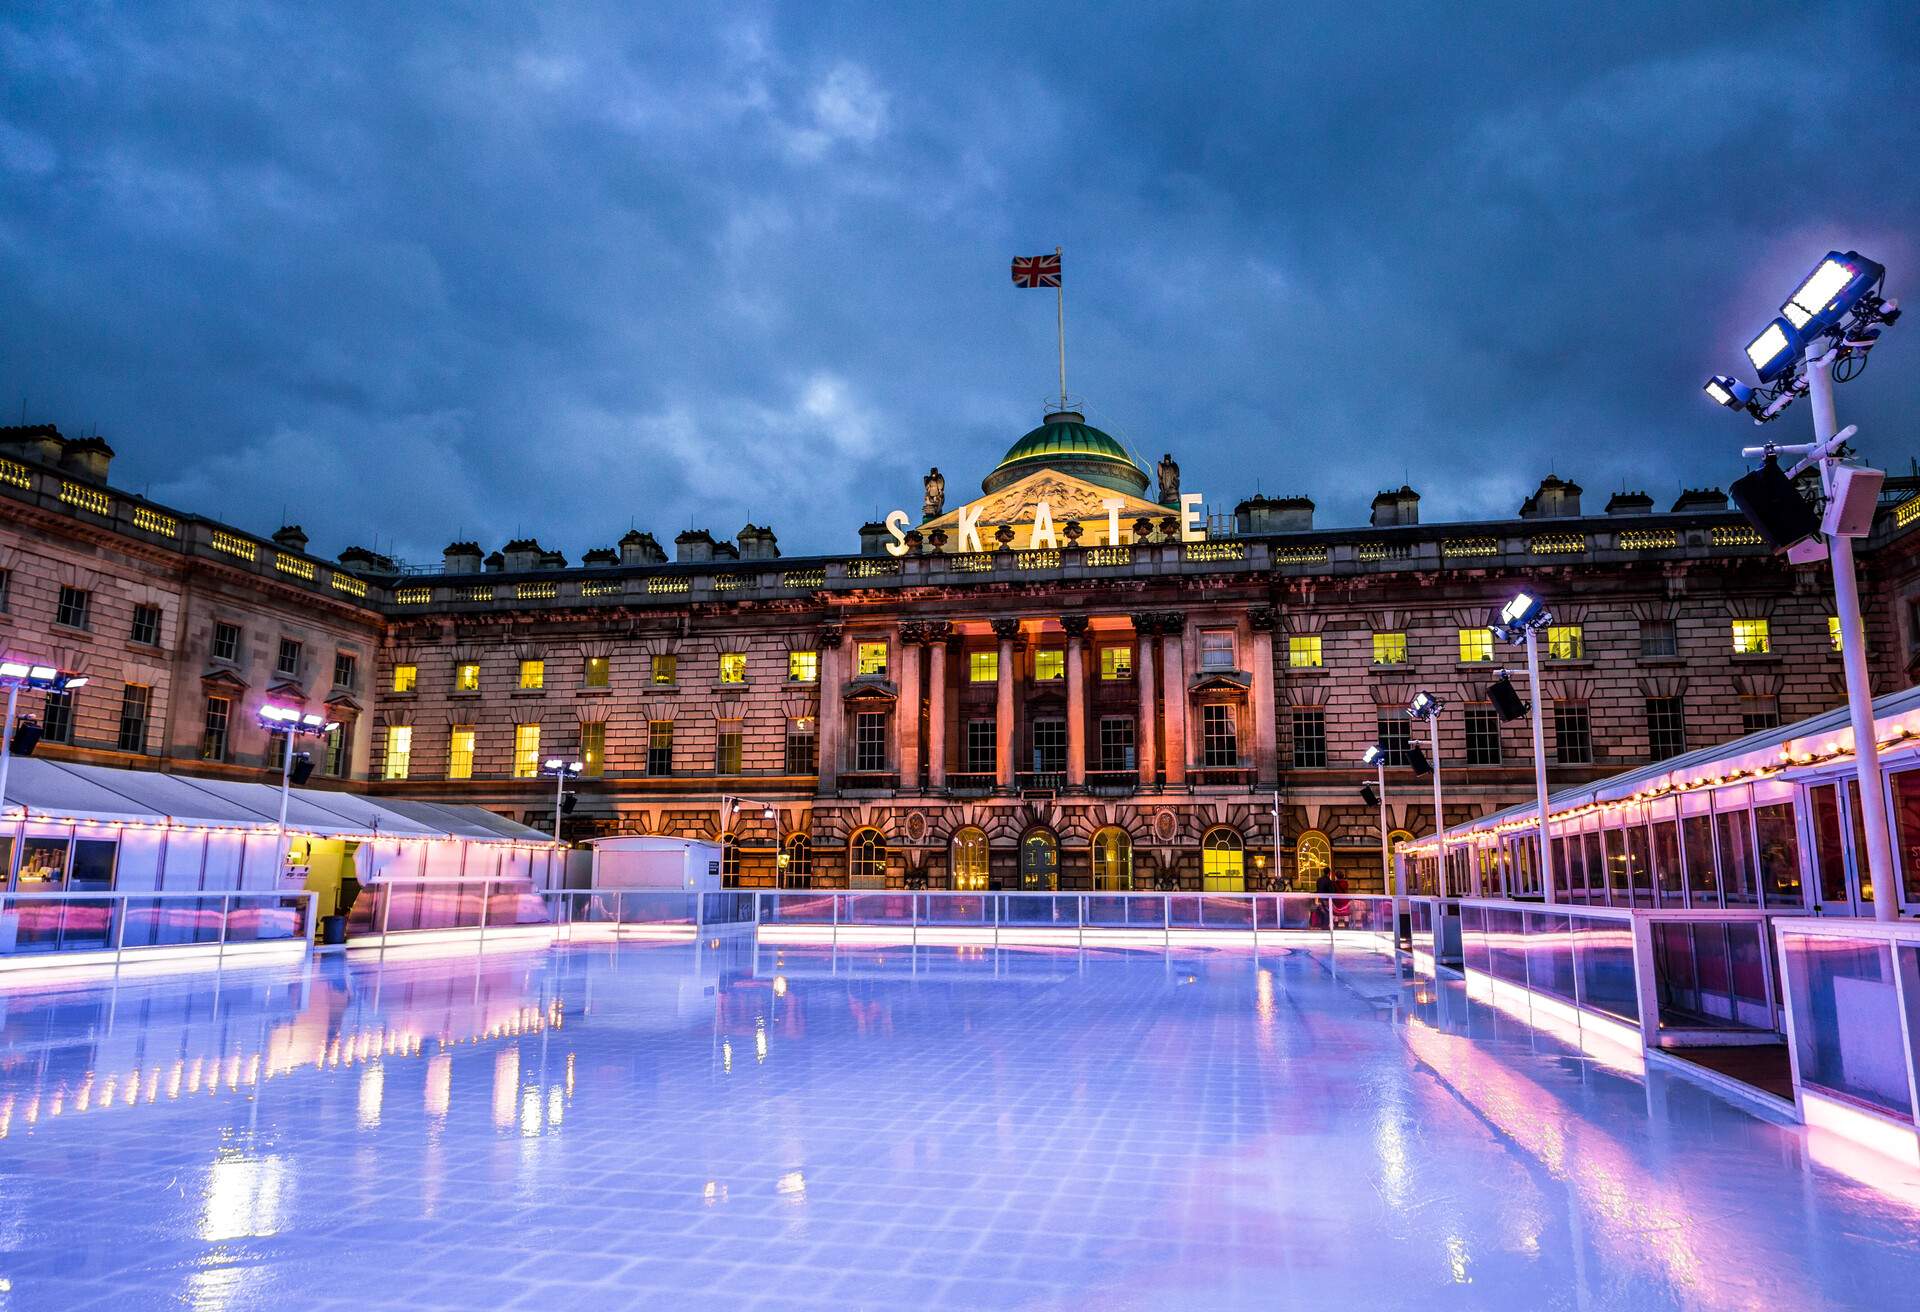 The Christmas ice skating rink at Somerset House on The Strand in central London, UK. The ice rink is empty with no people on it, as it is just about to be cleaned and maintained by the special ice machines. The sun is about to set and the sky features a moody and ominous cloudscape. Horizontal colour image with room for copy space.